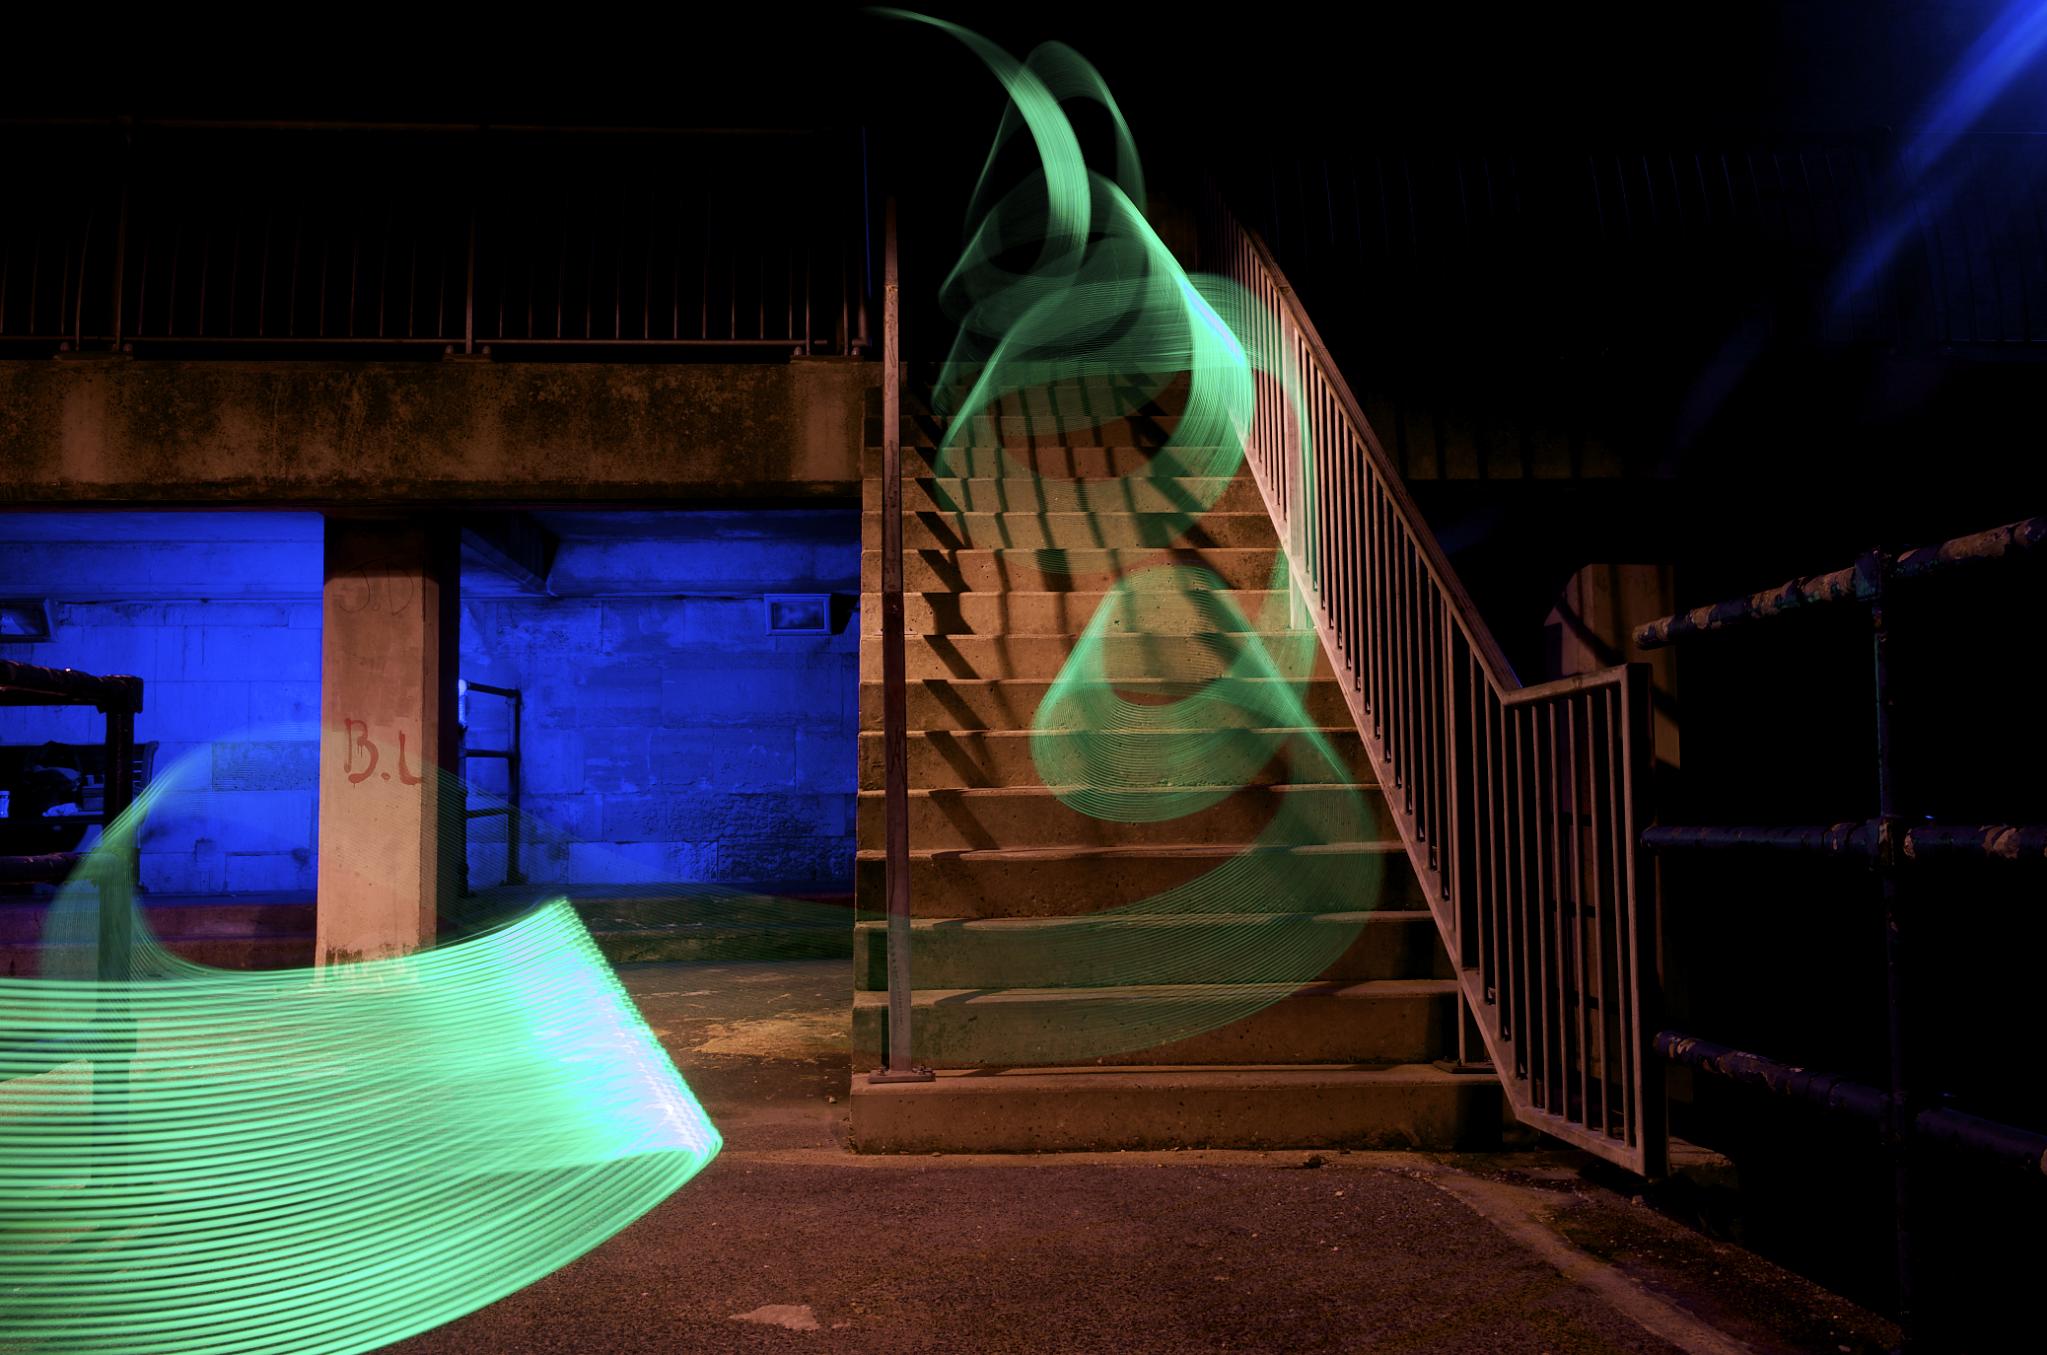 motion capture image at nighttime of light streaming down stairways